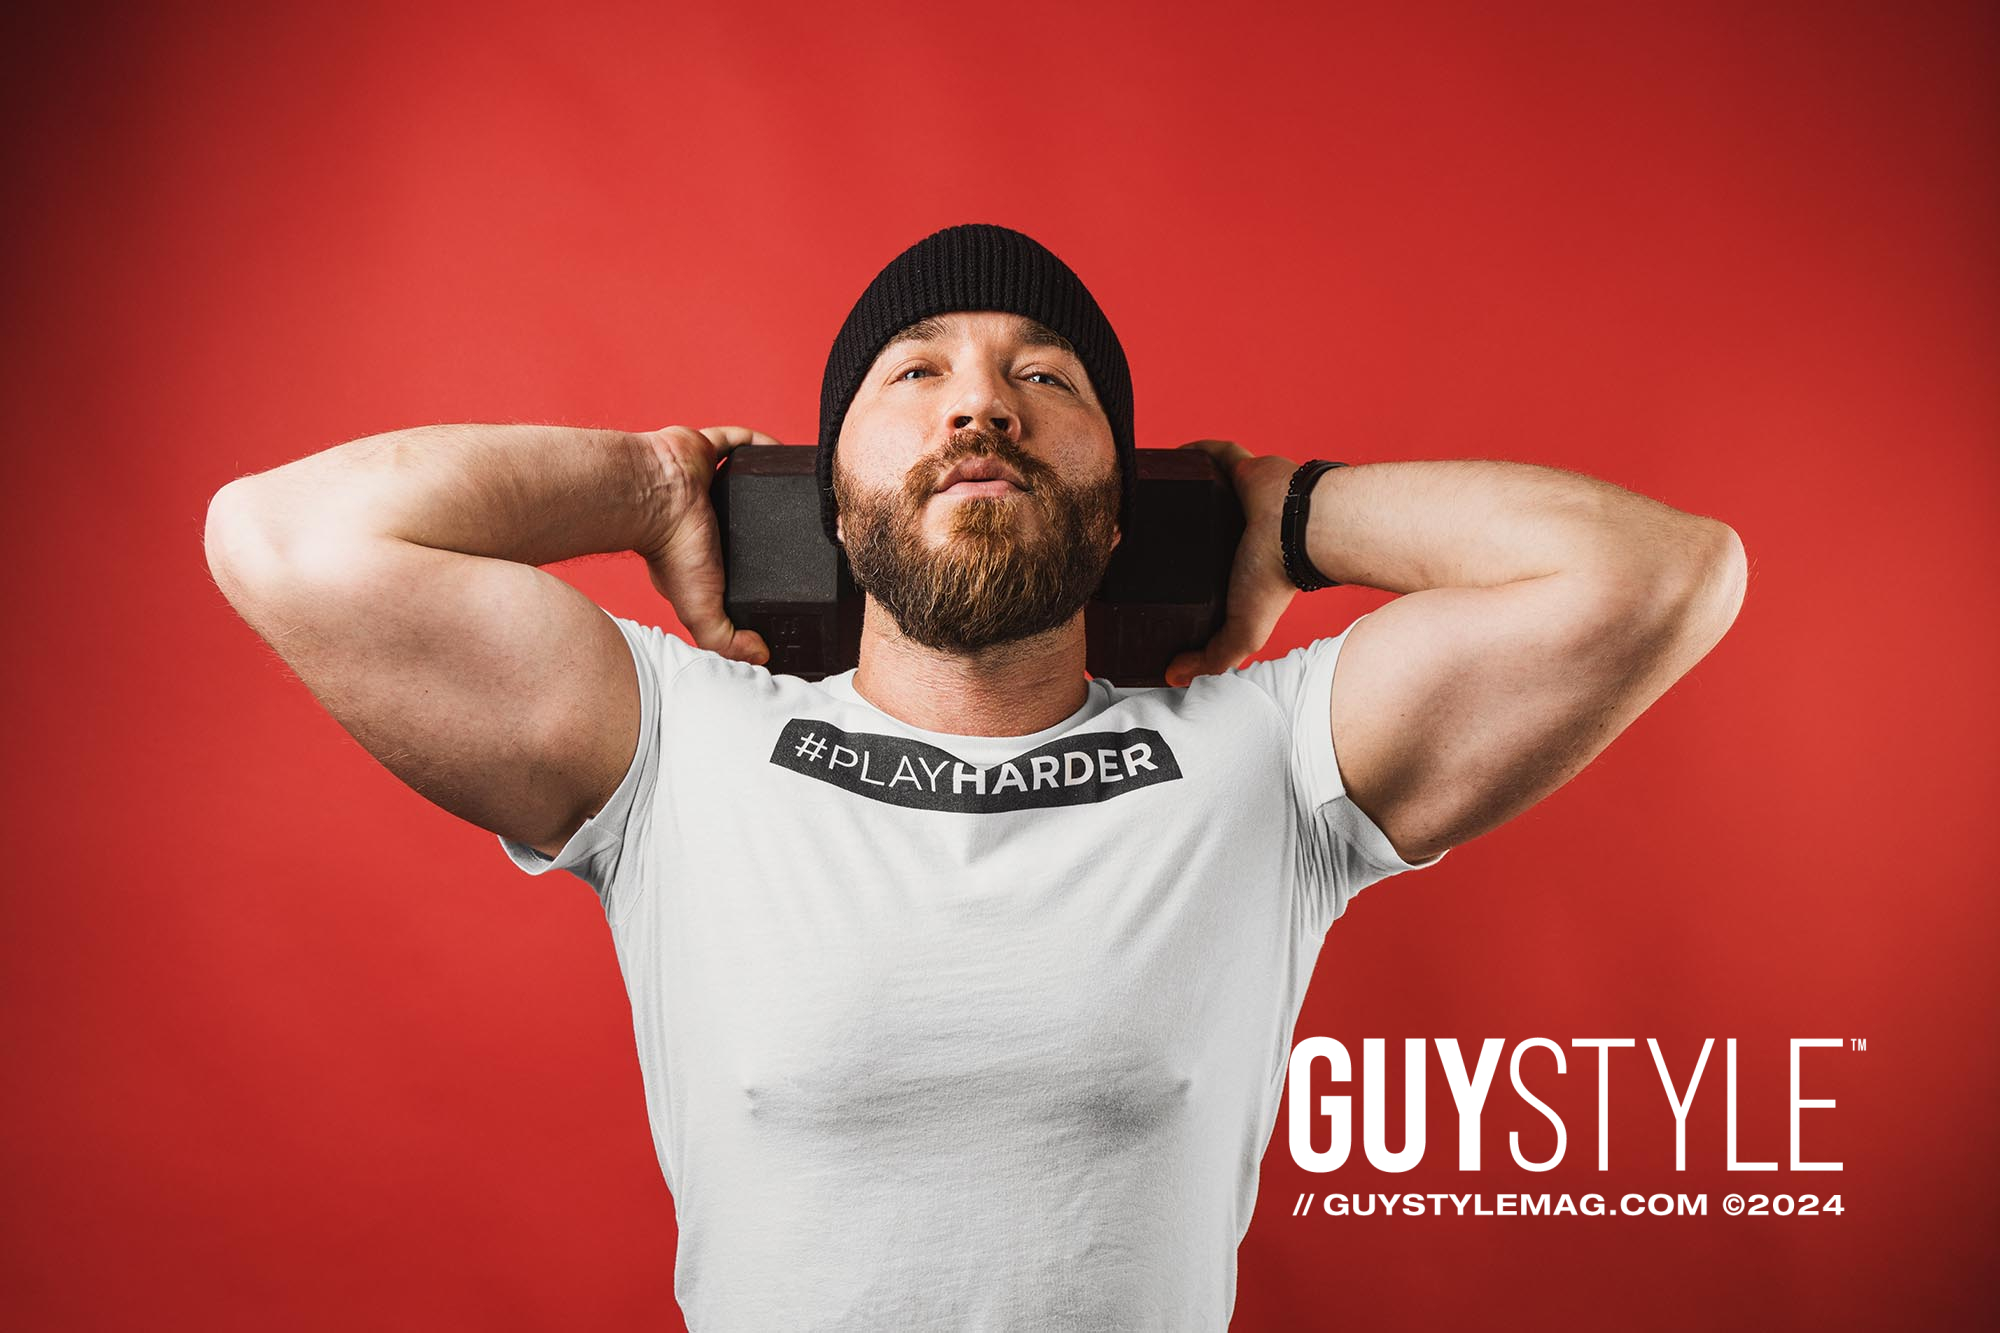 Perfecting Your Gym Look: The Complete Guide to Gym Apparel for the Modern Gay Man by Maxwell Alexander – Presented by HARD NEW YORK